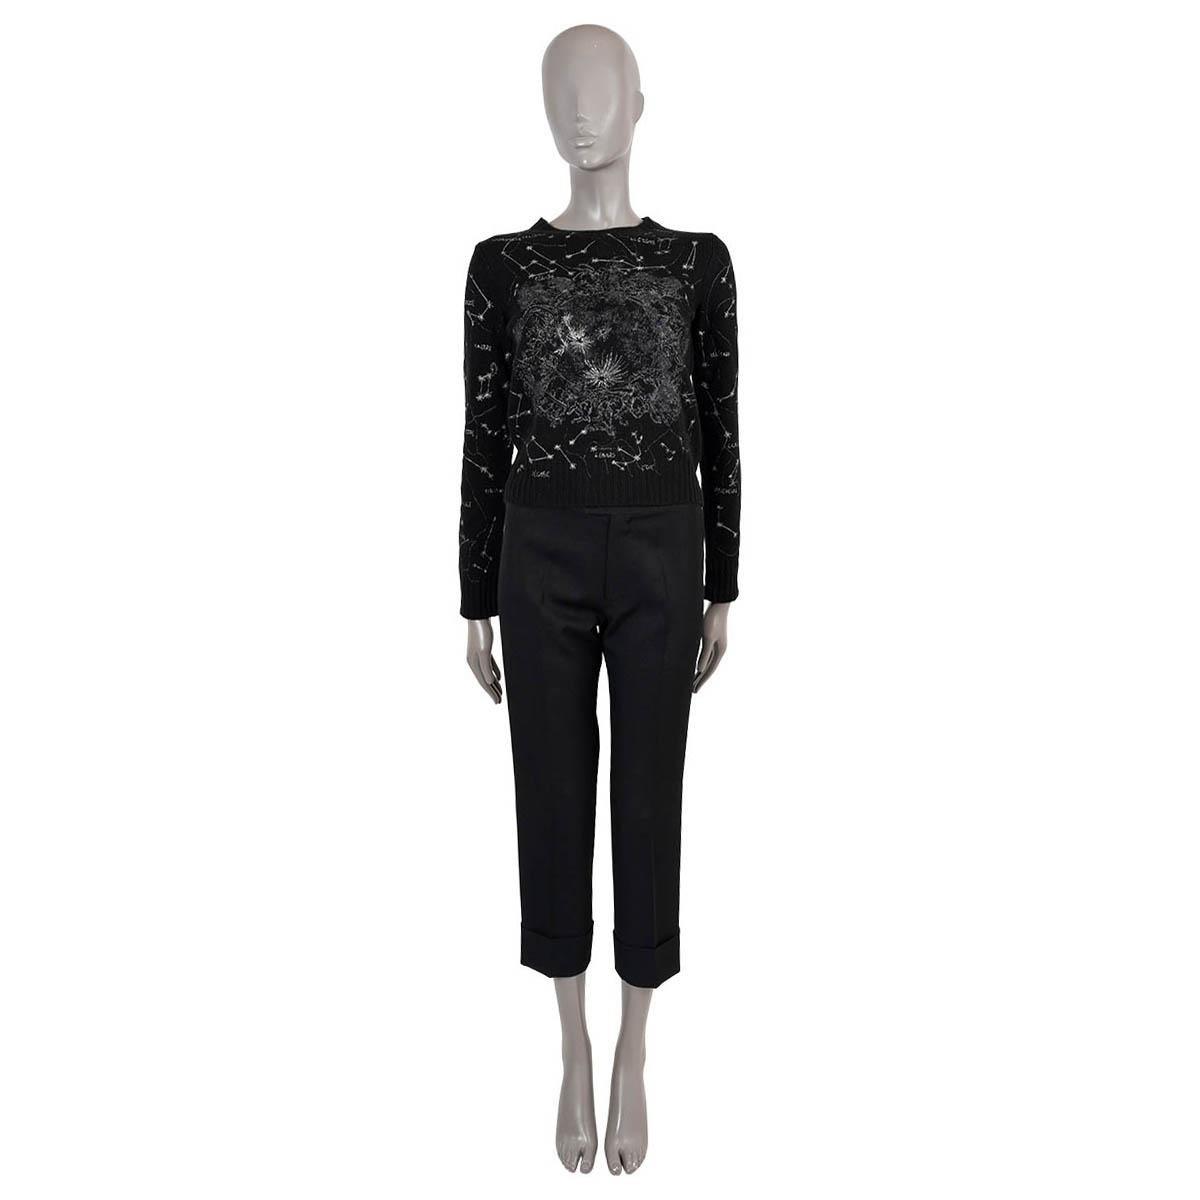 100% authentic Christian Dior Zodiac sweater in black cashmere (100%) with ivory embroidery. Features a crewneck and rib knit cuffs and hem. Unlined. Has been worn and is in excellent condition.

2021 Resort

Measurements
Model	114S45BM014
Tag